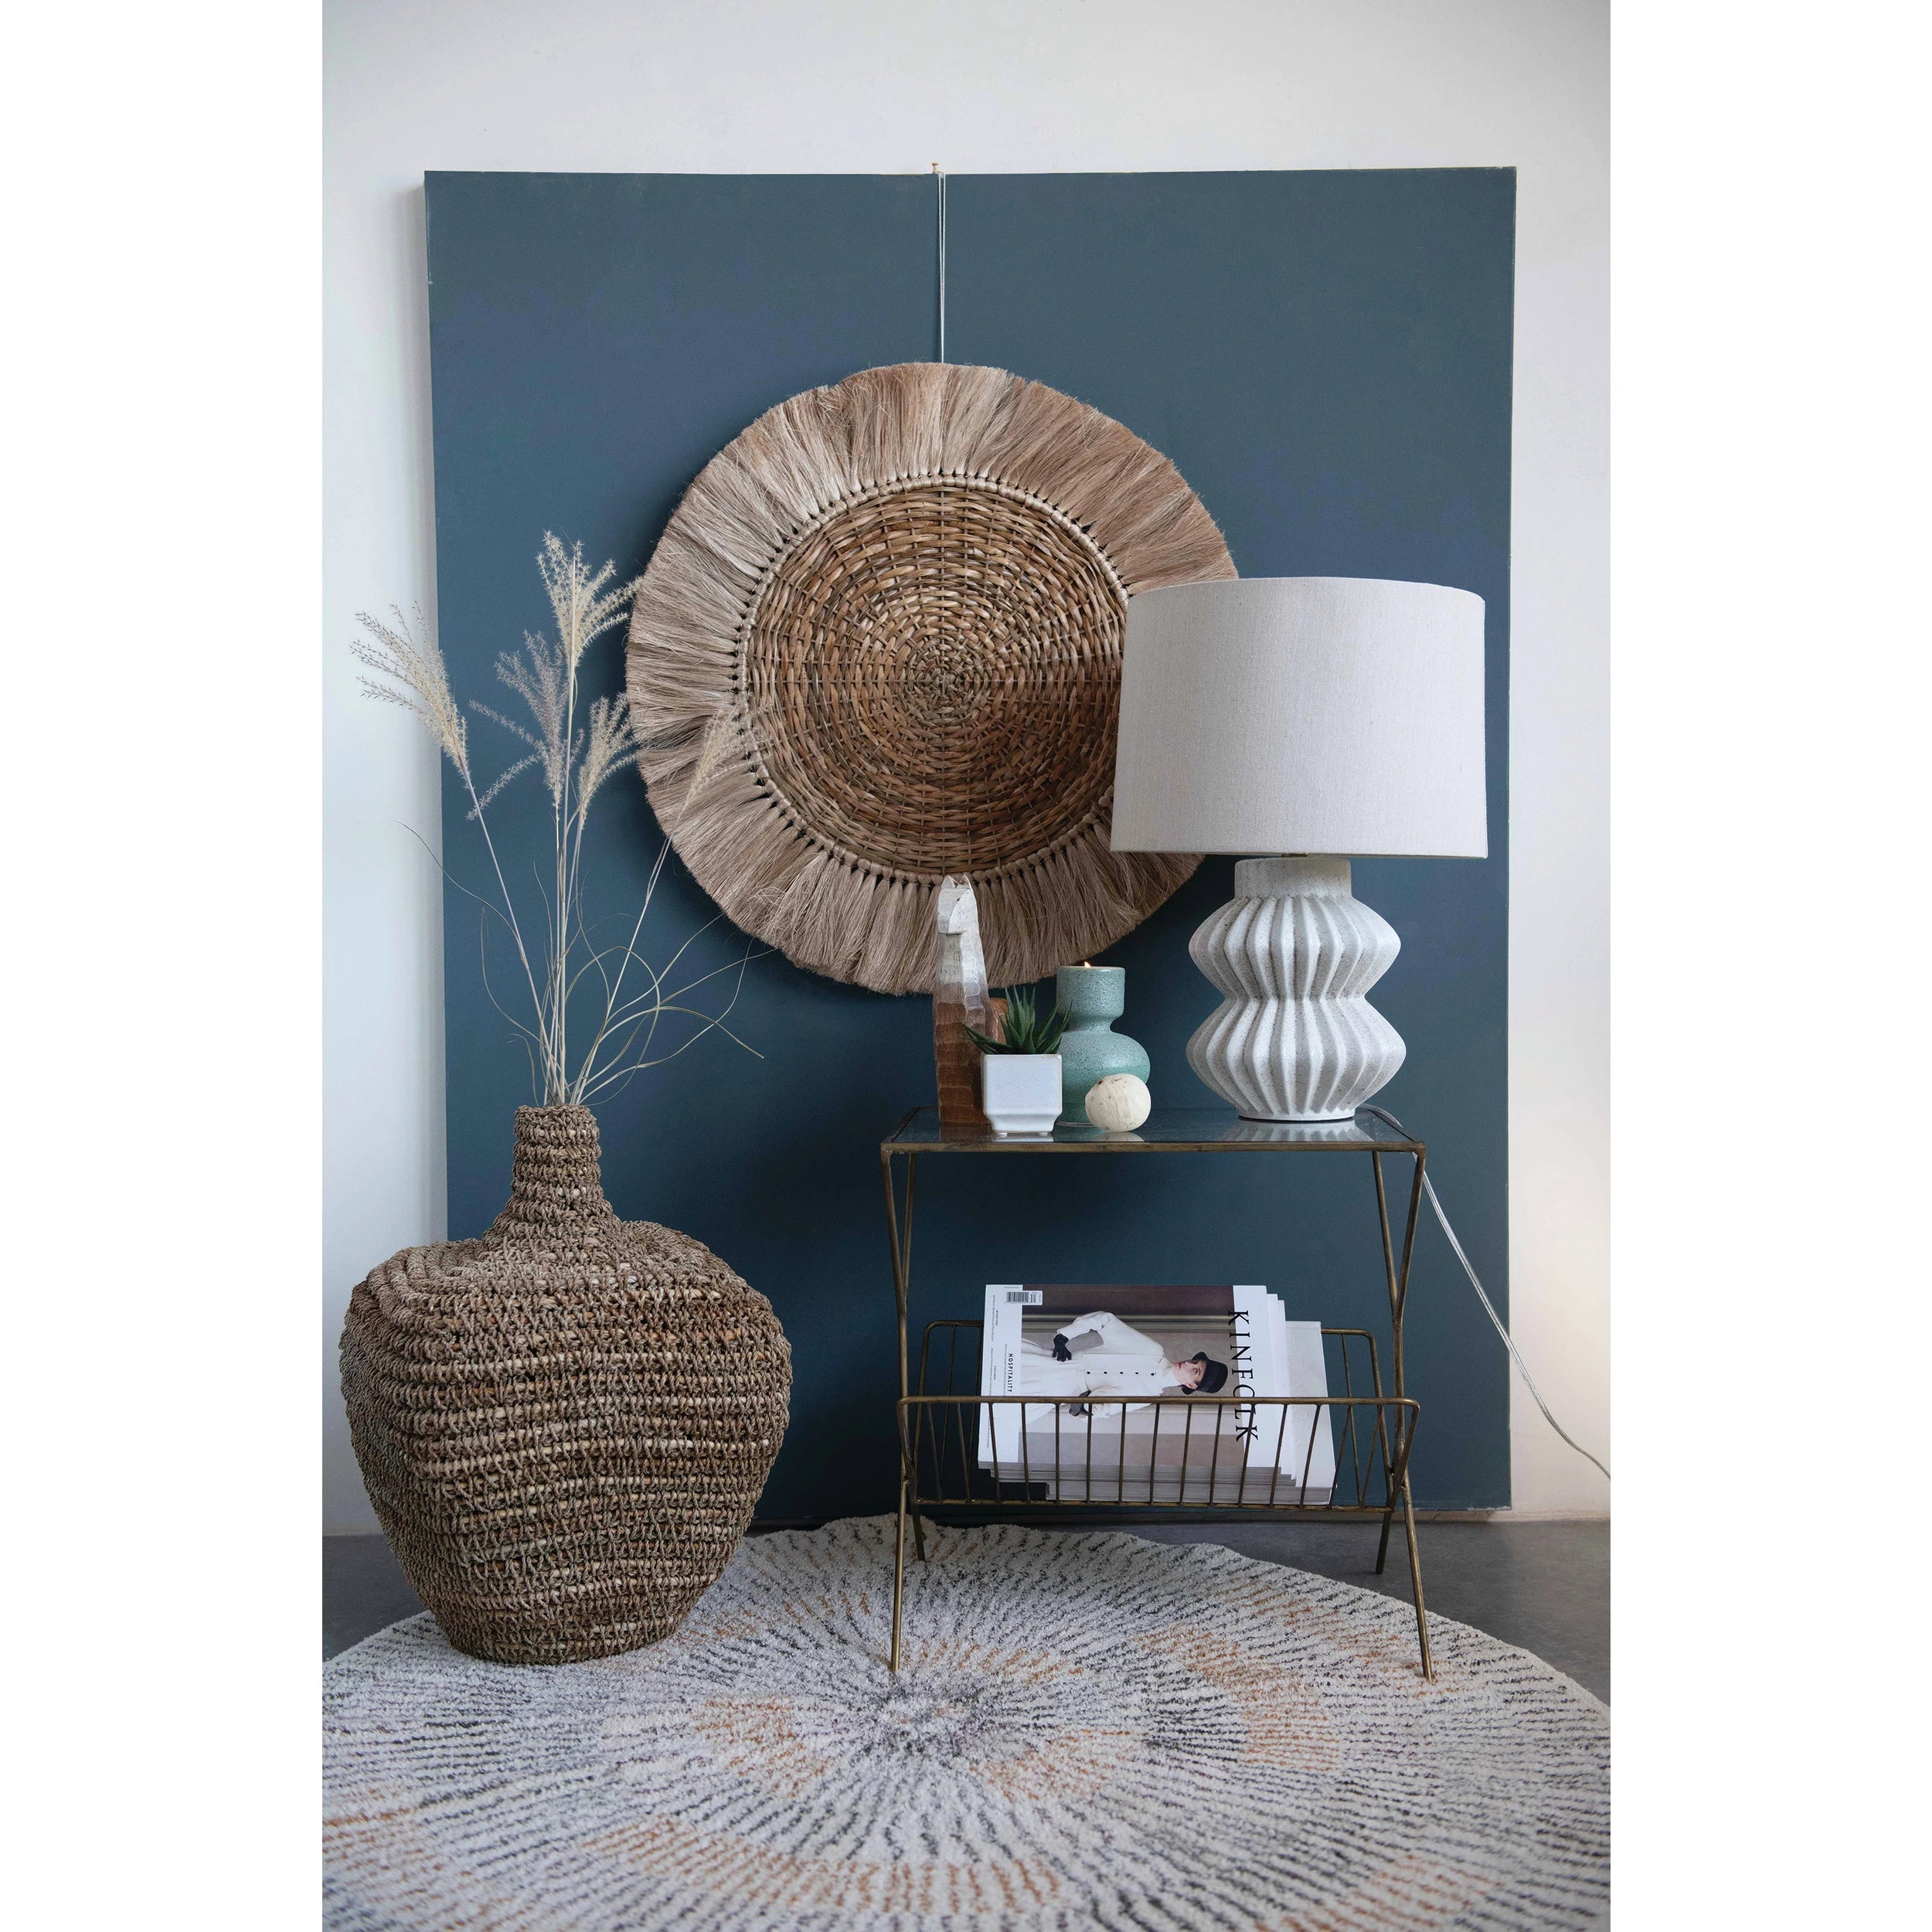 Hand-Woven Wall Decor with Fringe